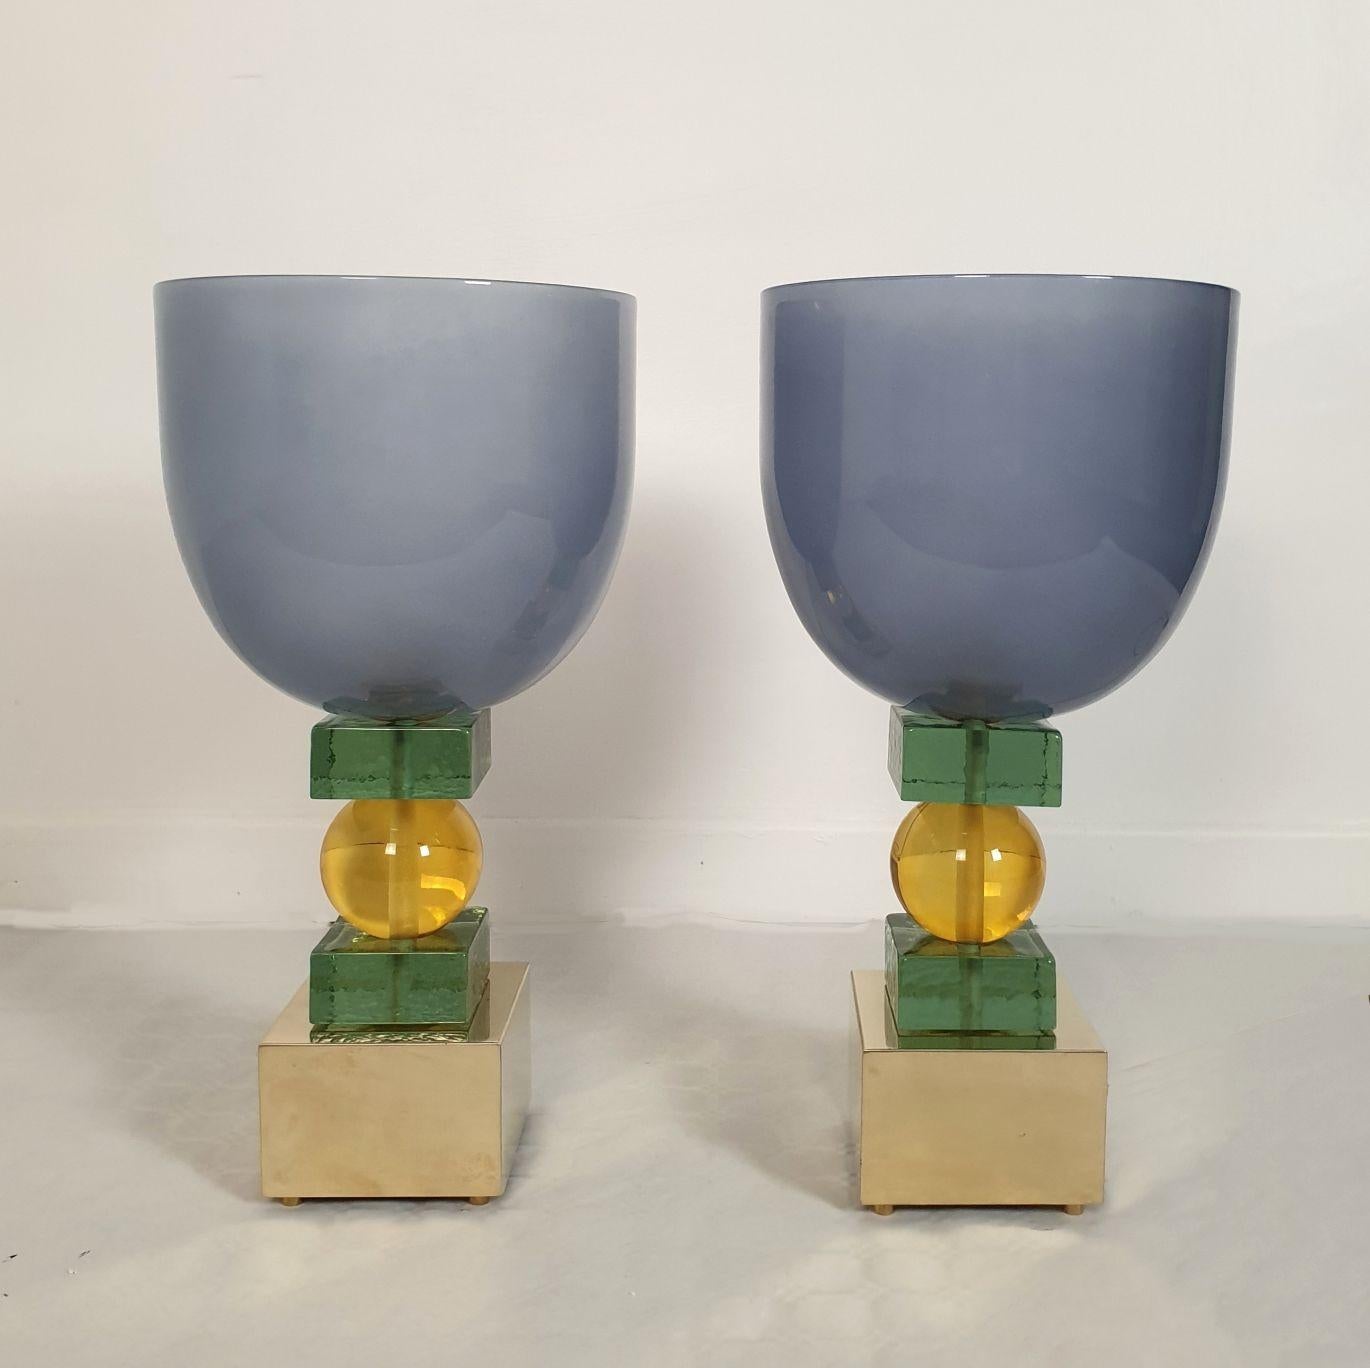 Large Mid Century Modern Murano glass table lamps, Italy 1980s. A pair.
Italian Memphis style lighting. Can be used as desk lamps.
The pair of lamps is colorful: a blue-gray top vase nesting the light, olive-green and yellow-amber central parts on a